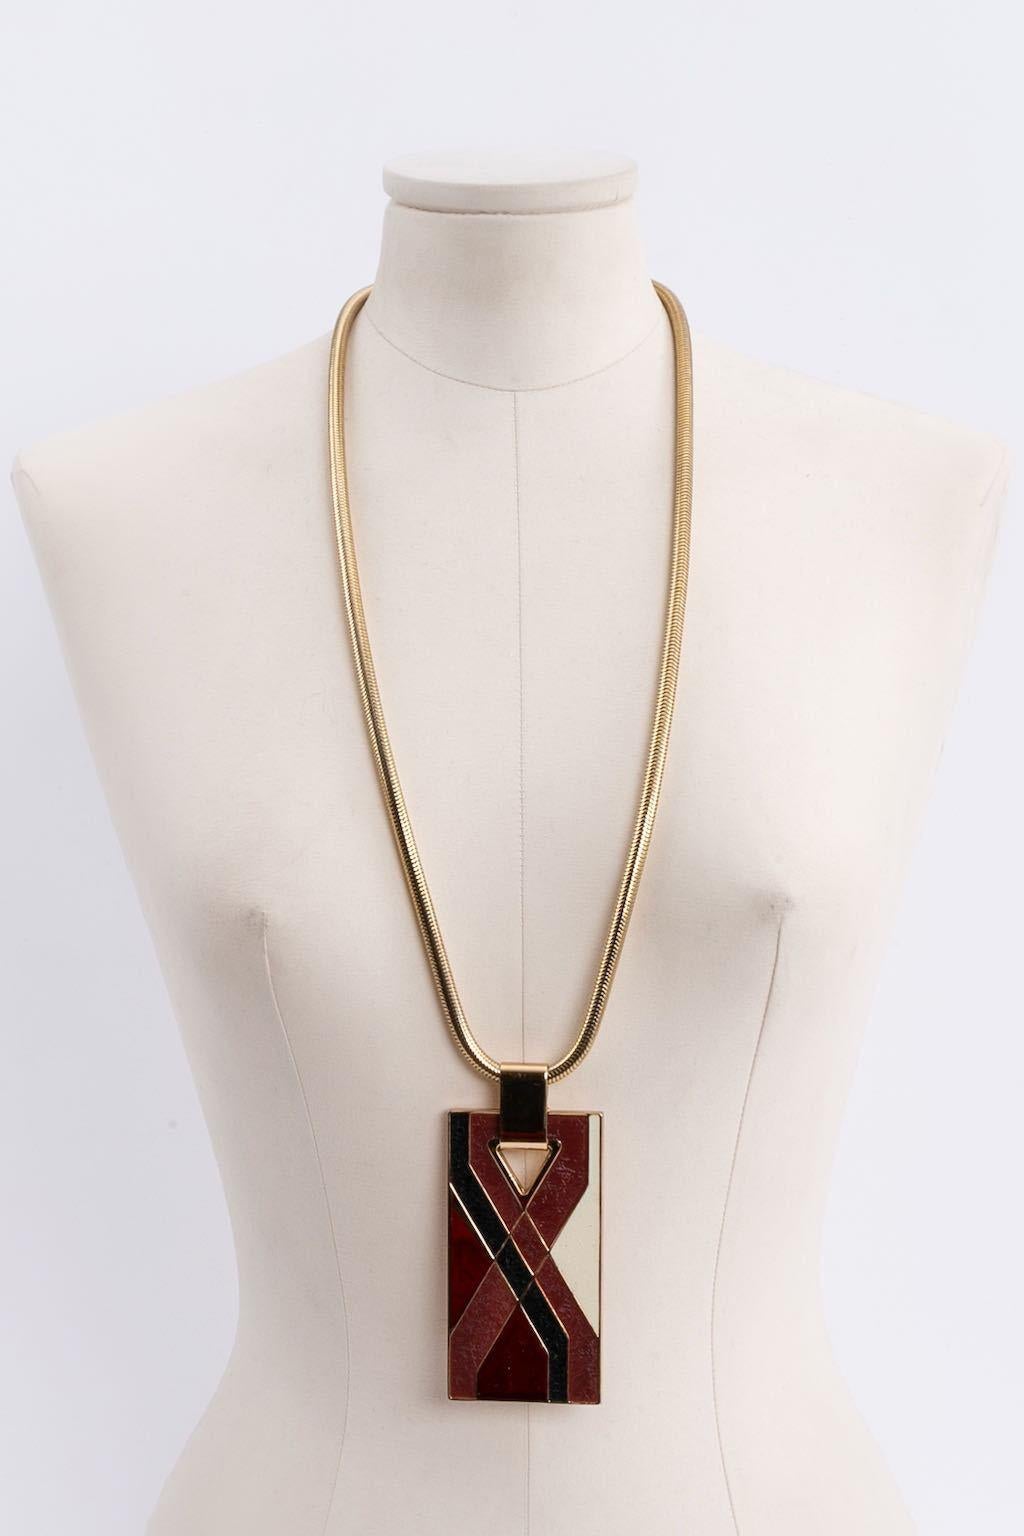 Lanvin - Gilded metal necklace with a pendant.

Additional information: 
Dimensions: Length: 78 cm (30.7